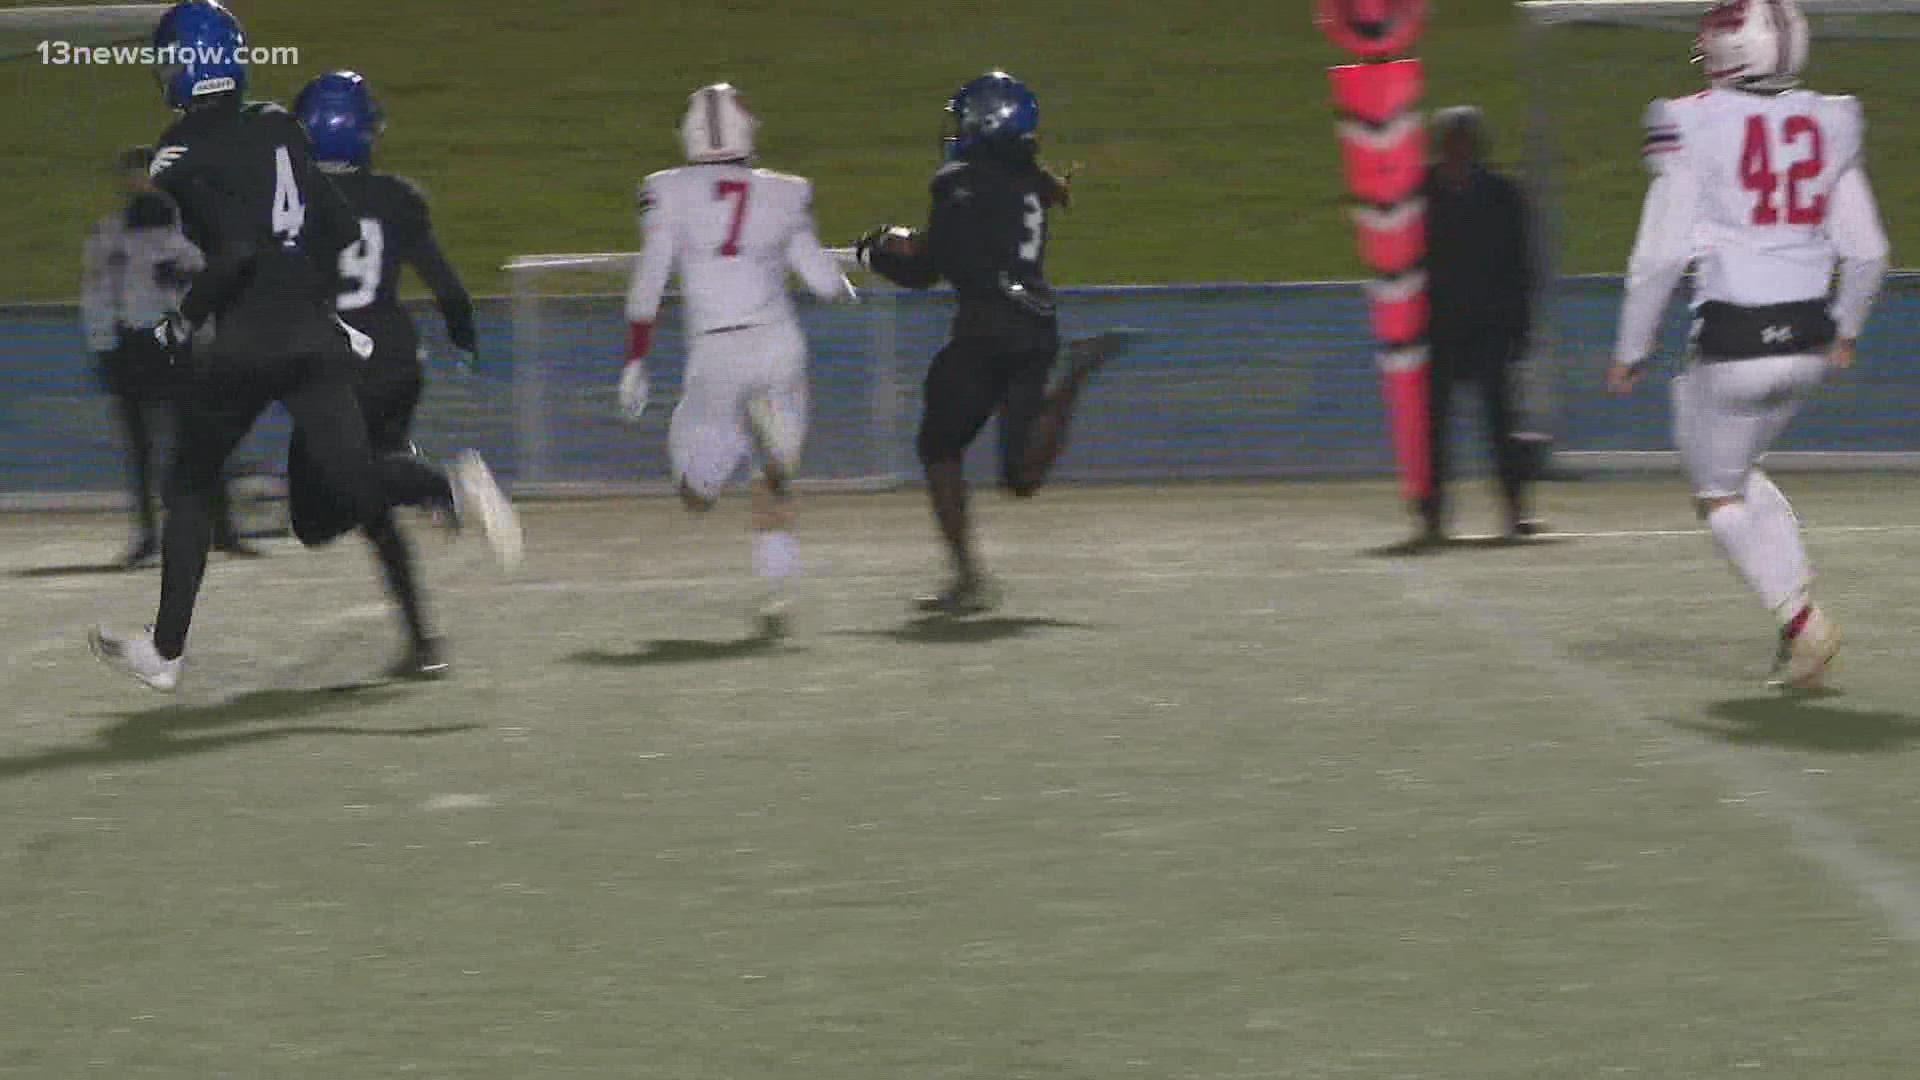 The Seahawks managed to pull away from North Cross 36-26 to win the VISAA Division II state championship.